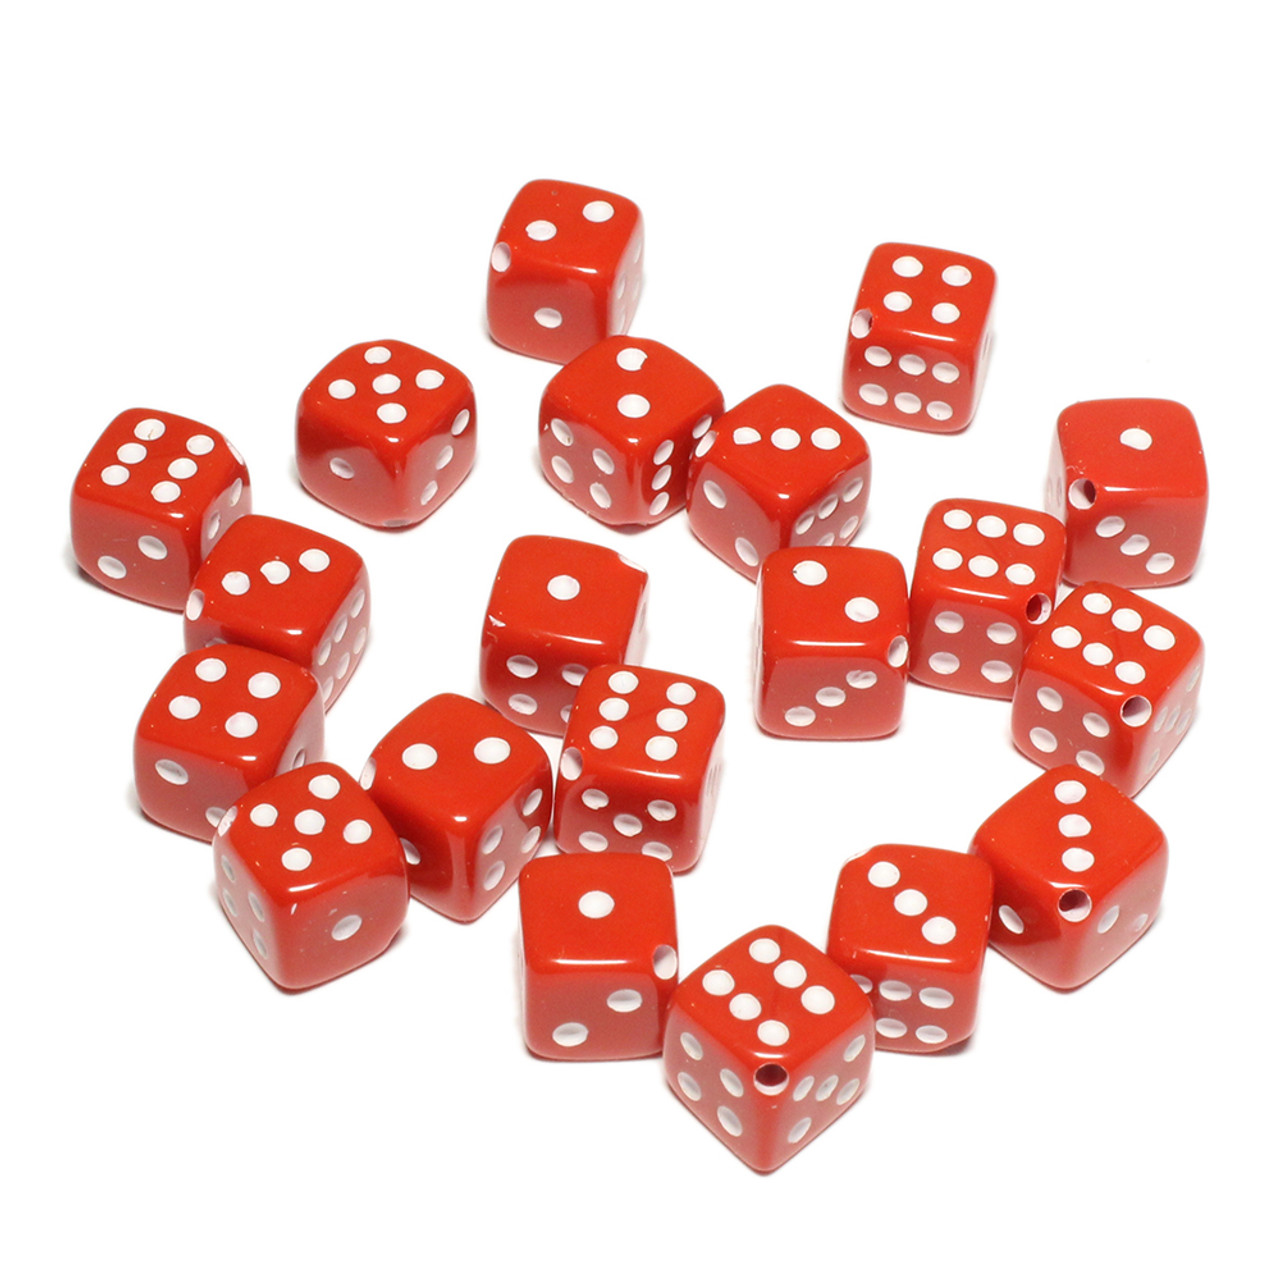 12 Dice 10mm White Colour Blue Red Numbers 6 sided Poker Board Games Yahtzee Die 